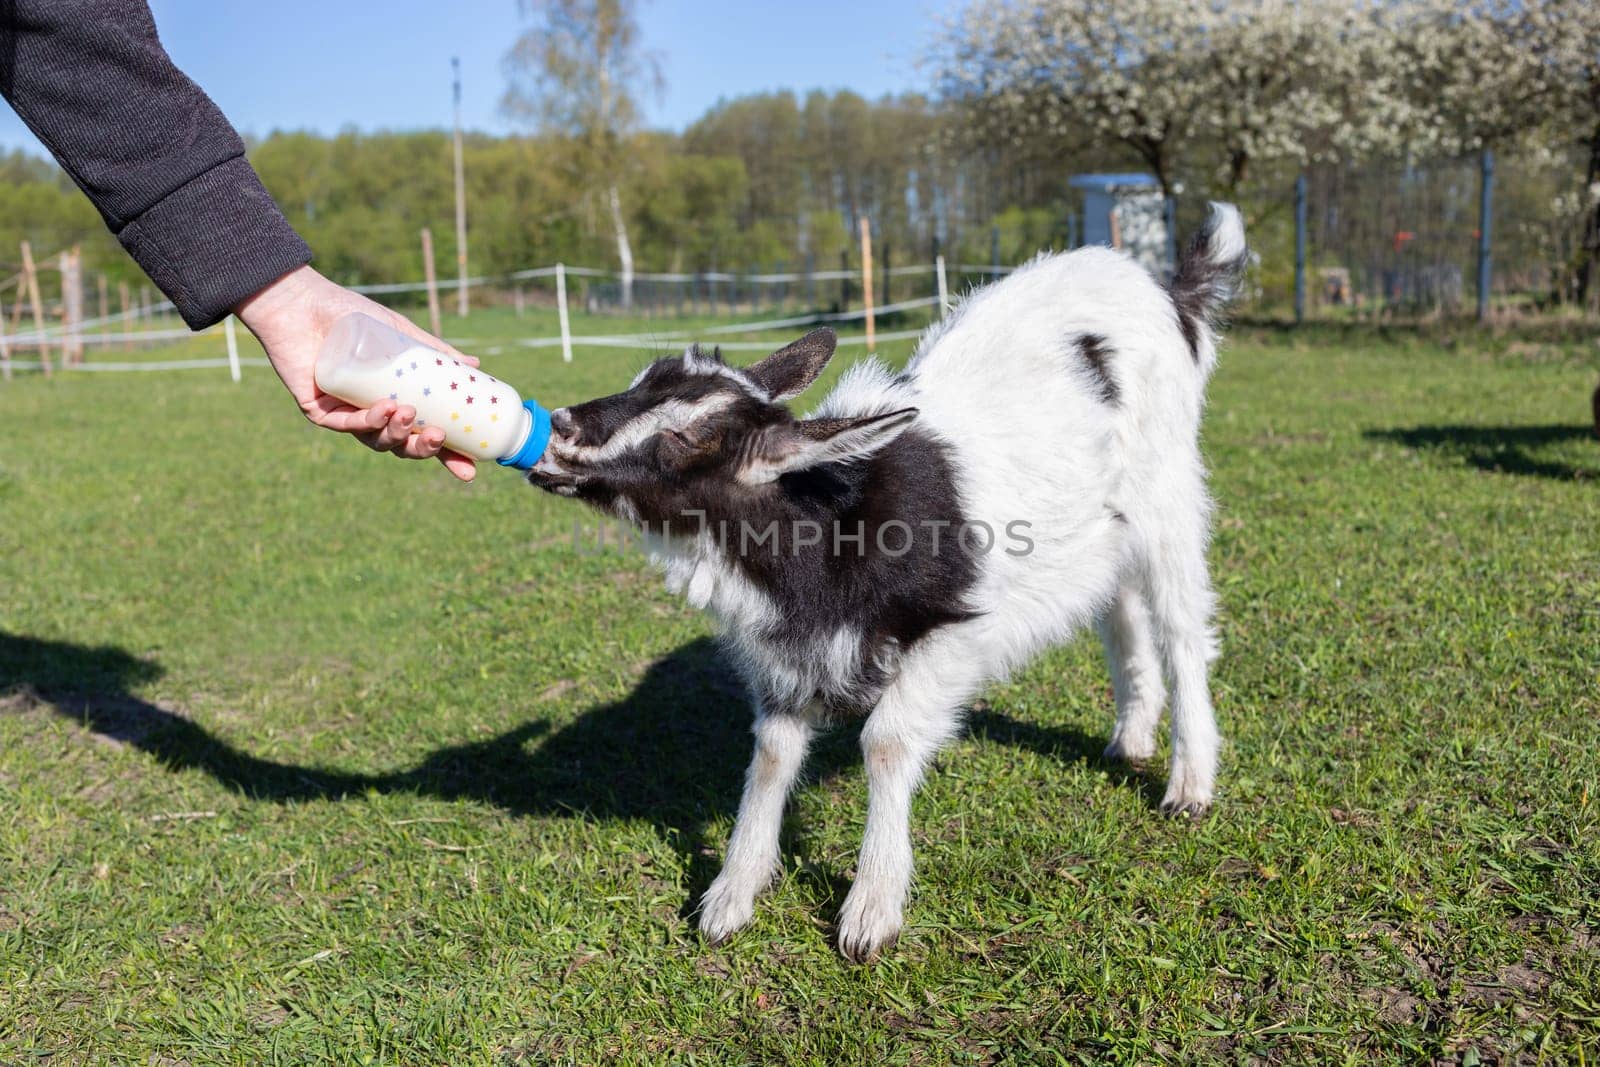 Someone Feeds Milk Babies Goat From Bottle On Farm In Summer Or Spring Time. Domestic Animals Care, Raising. Meadow, Green Blooming Trees On Background. Horizontal Plane by netatsi